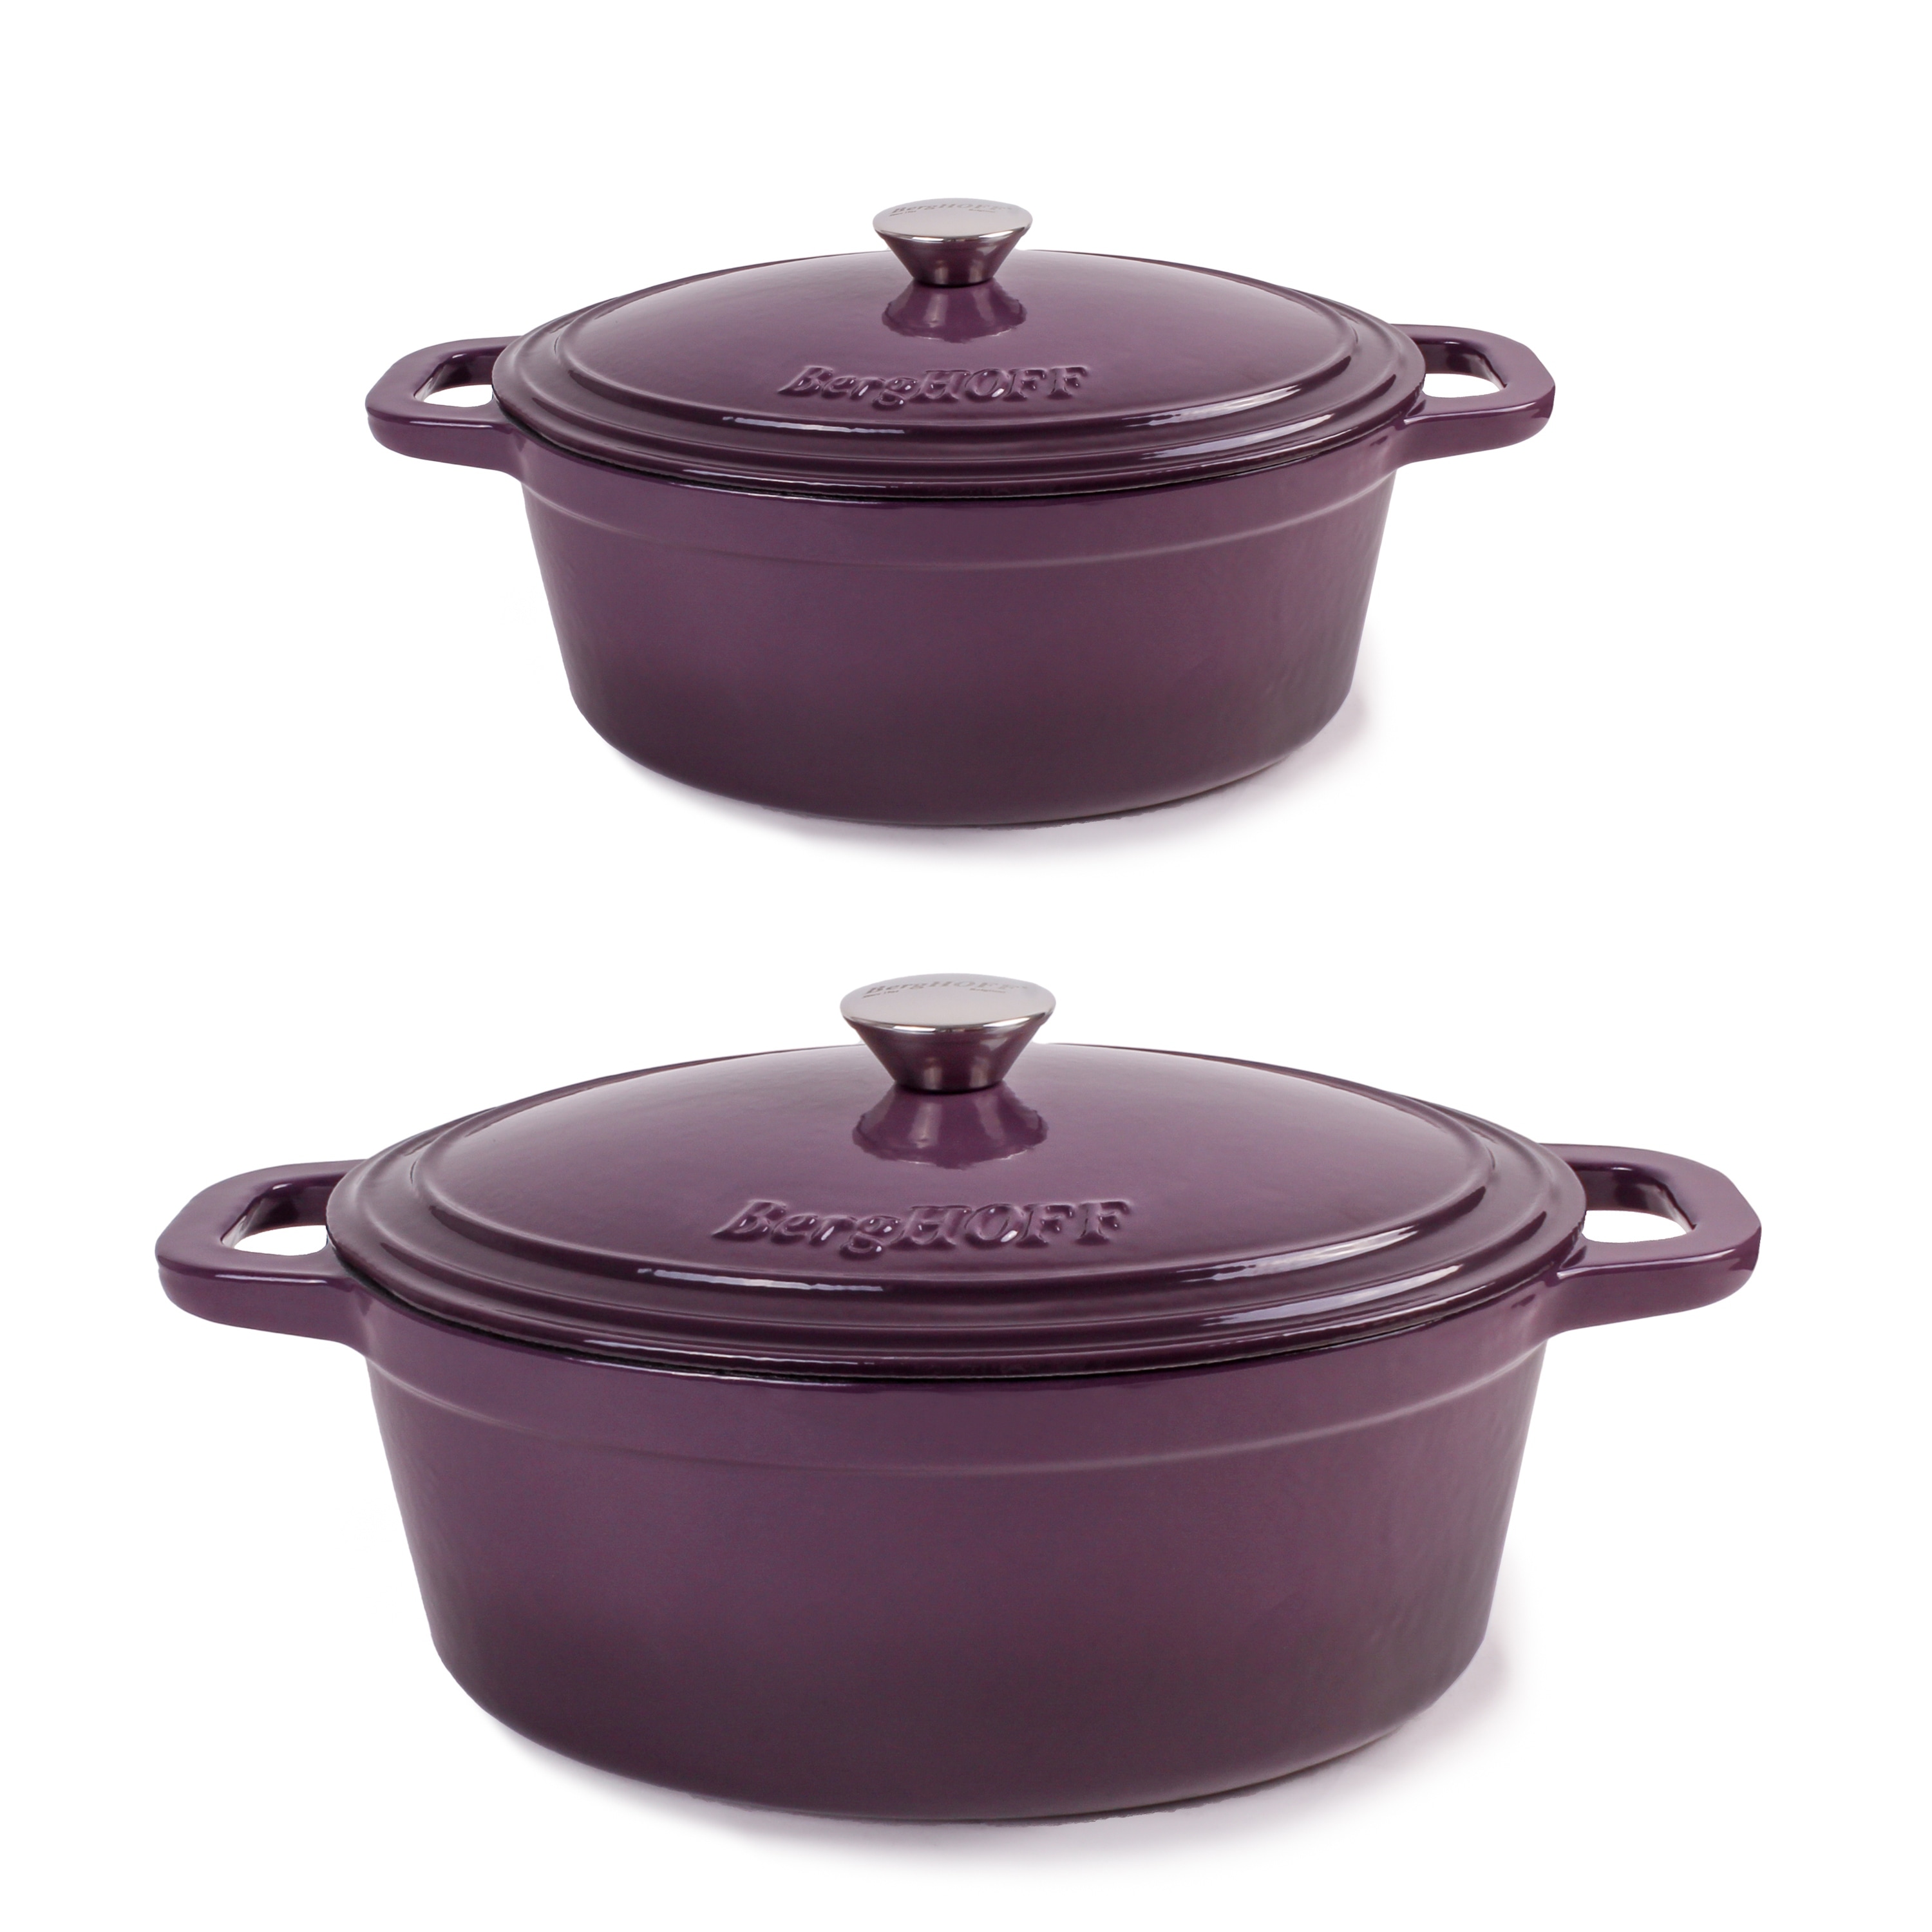 https://ak1.ostkcdn.com/images/products/is/images/direct/6672c9900a9c9387f758e544e5d32112e289ab09/Neo-4pc-Stockpot-Set-5Qt-and-8Qt-Purple.jpg